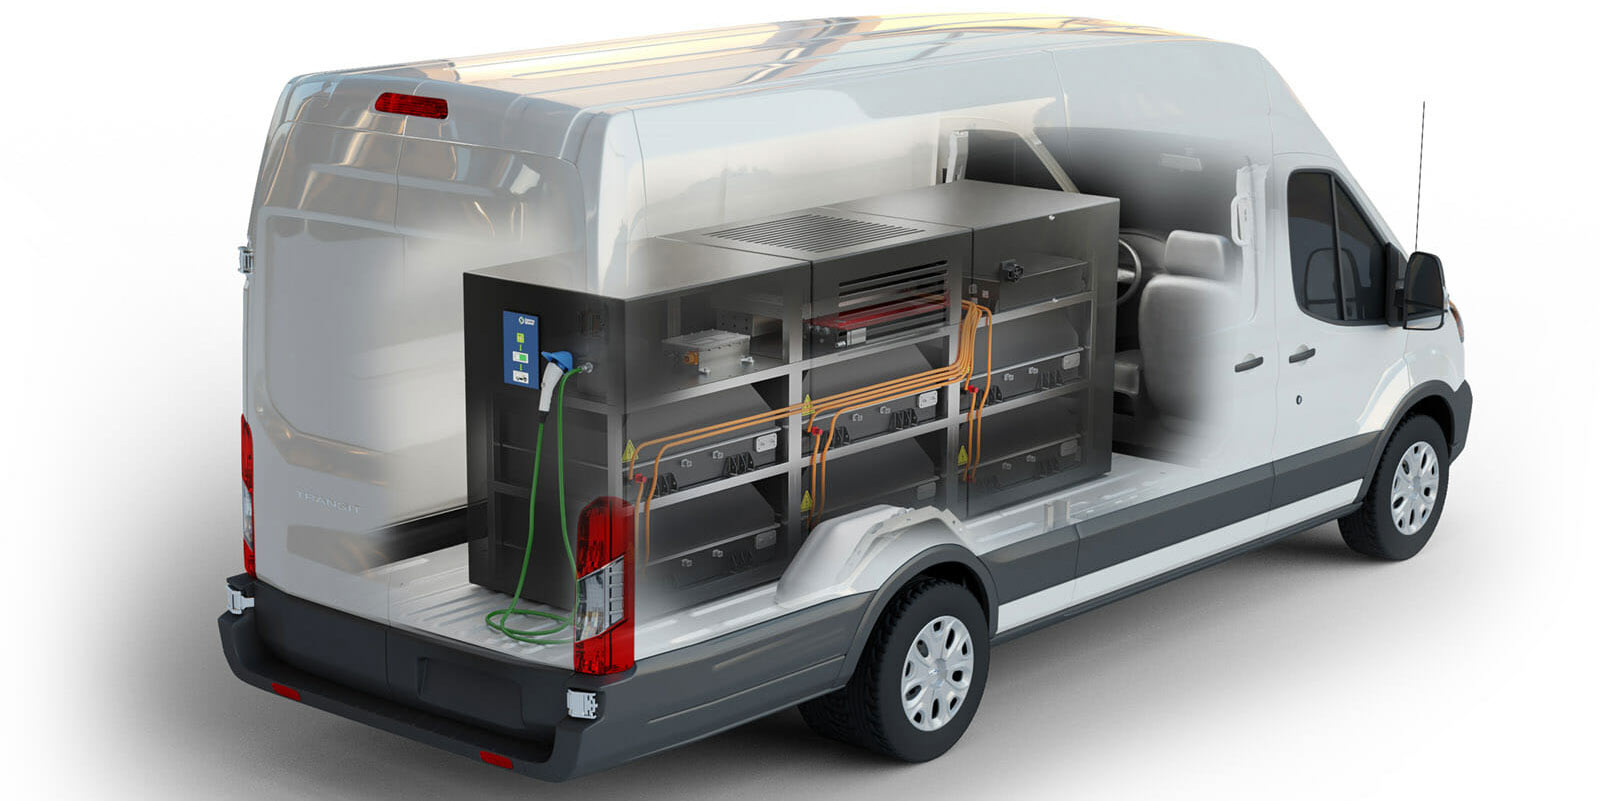 Mobile EV chargers and vans get for time - Electrek